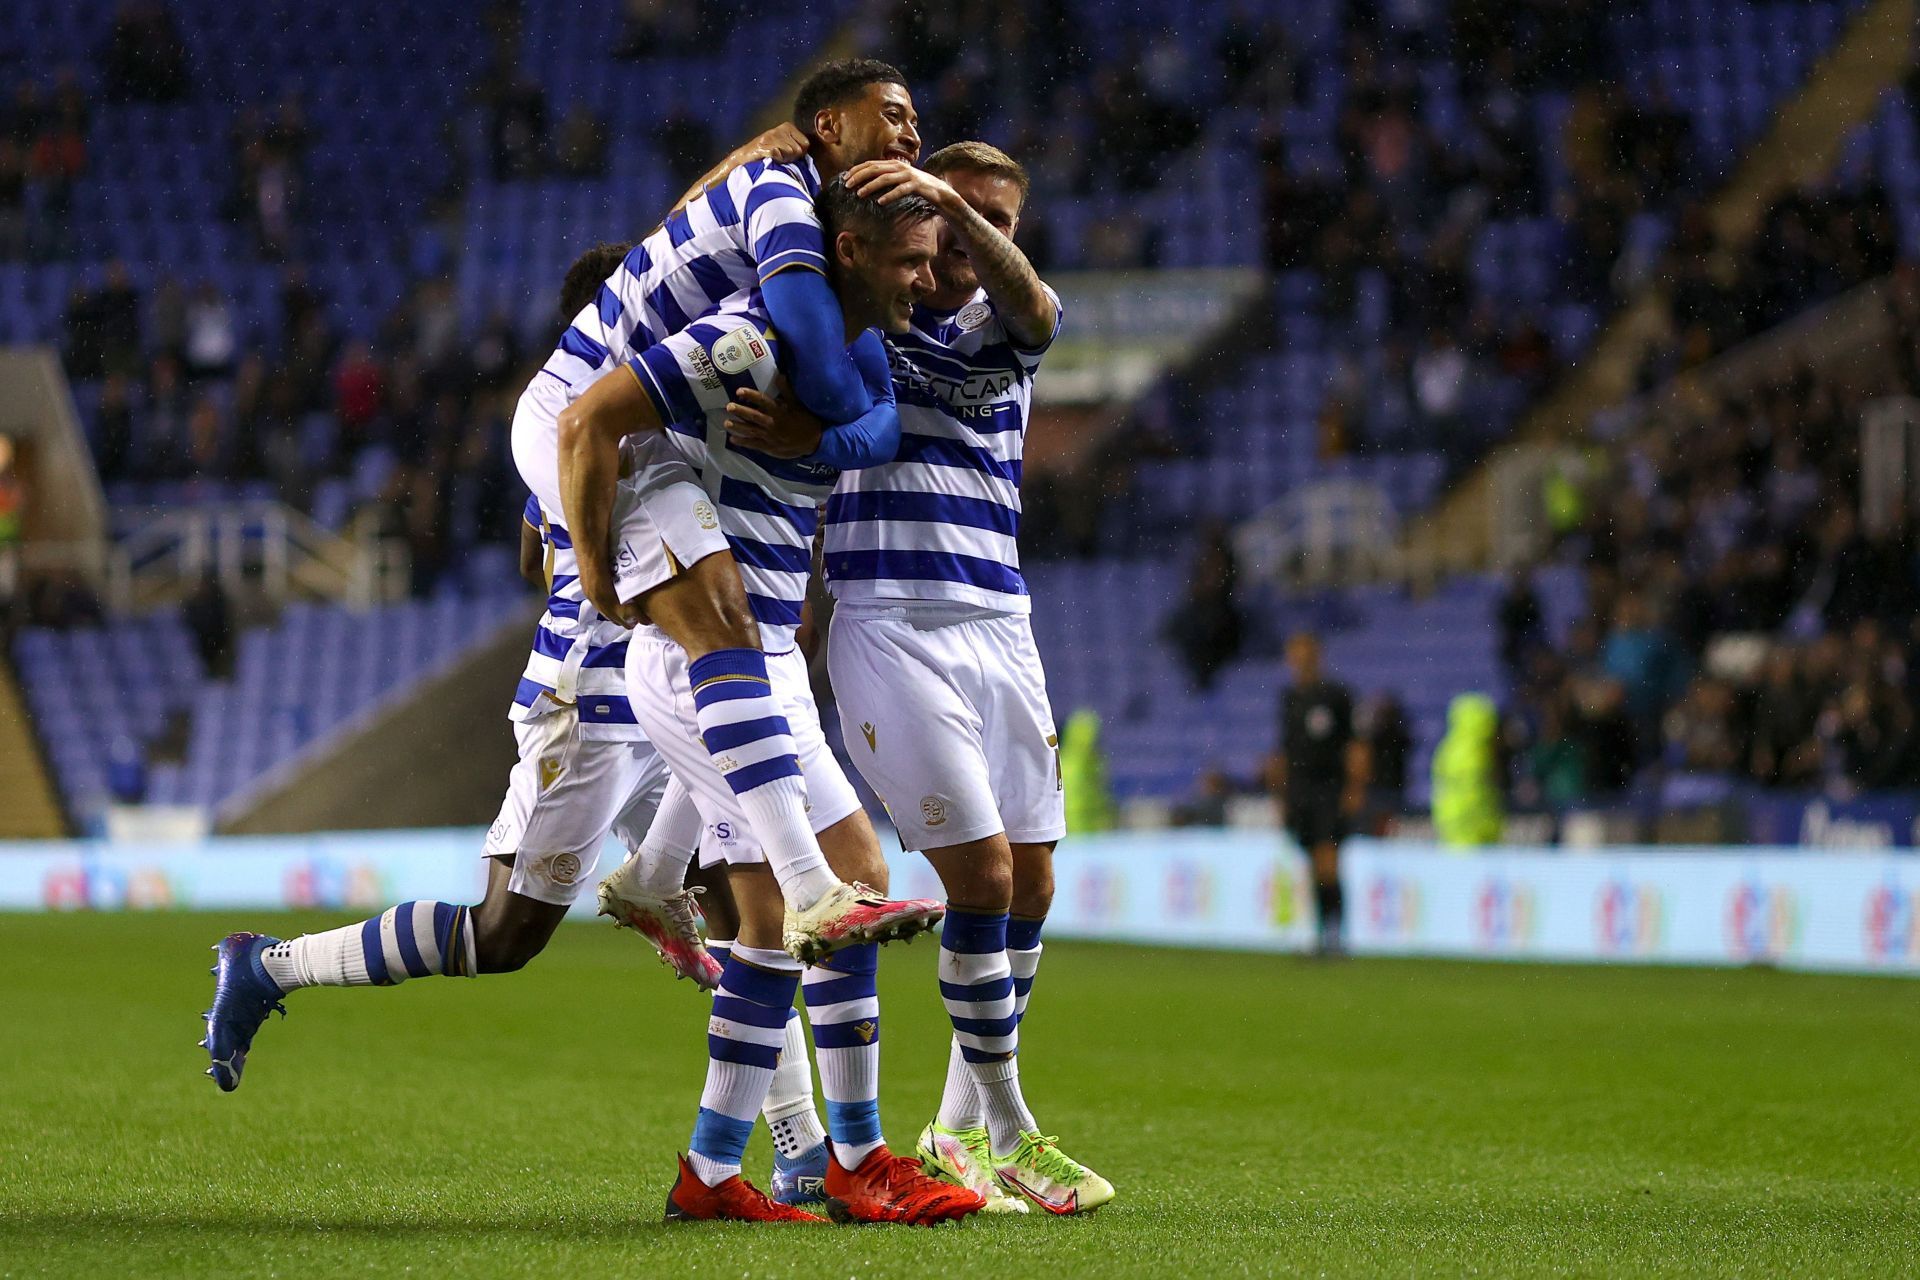 Reading and Swansea City will battle for three points on Saturday